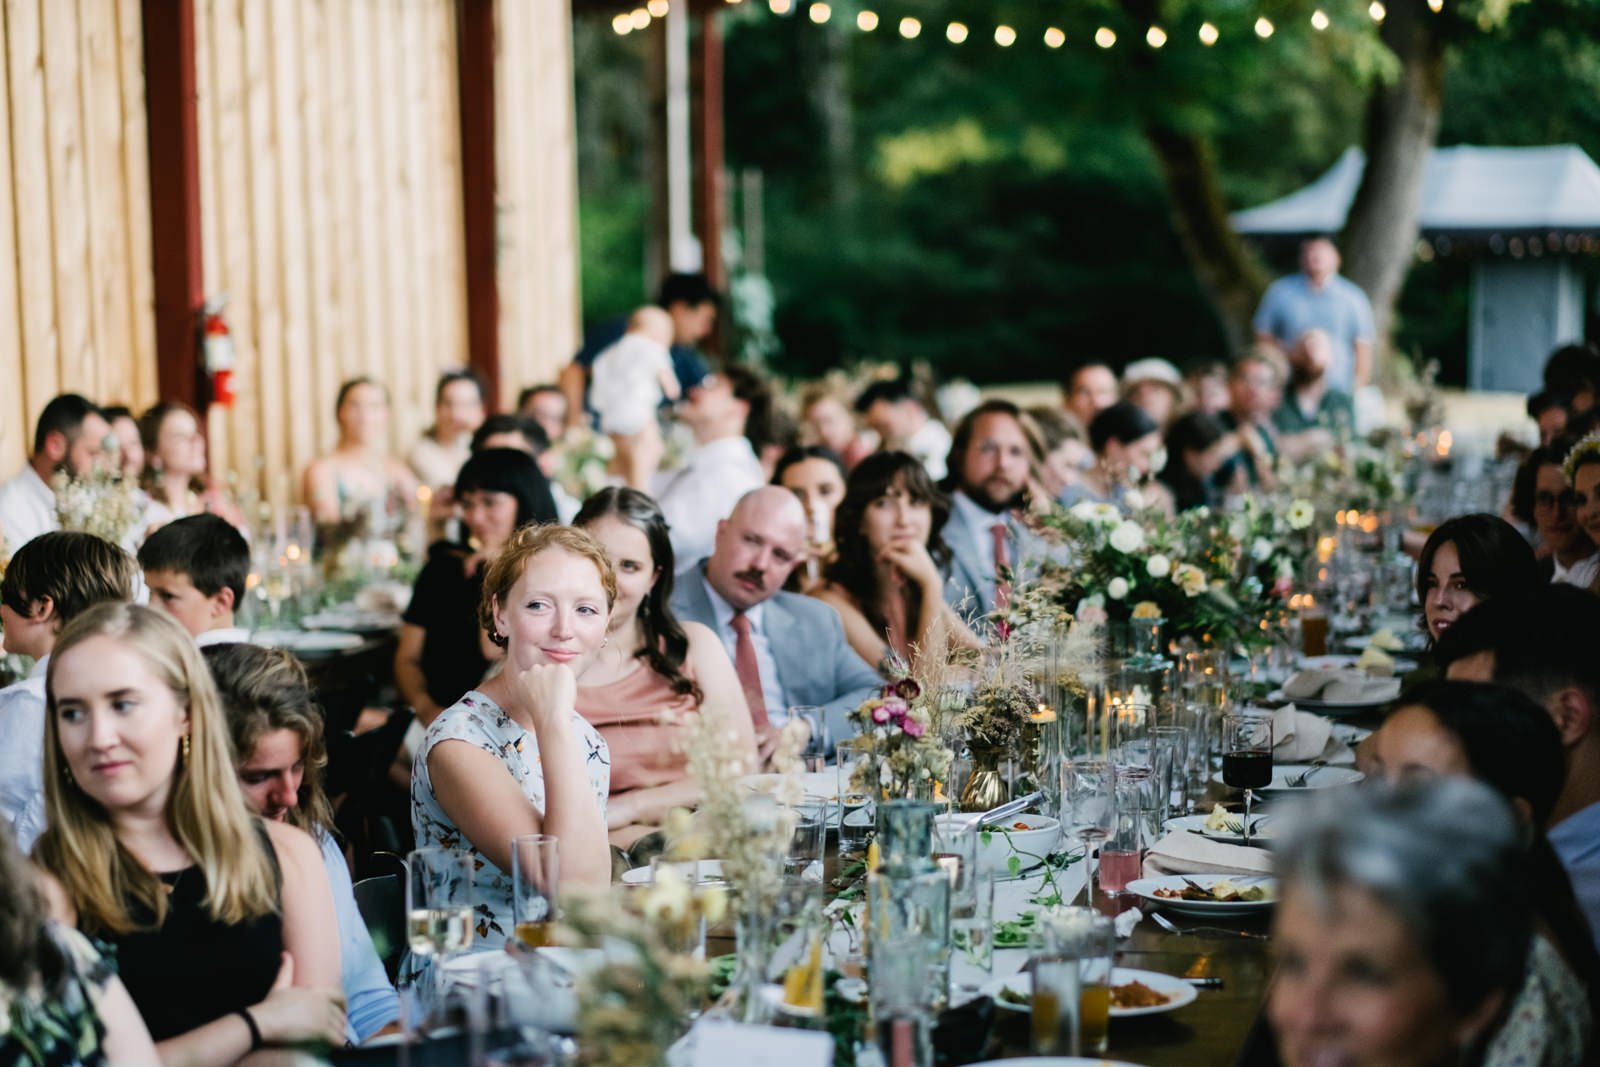  Wedding guests listen to toasts in outdoor seating area 